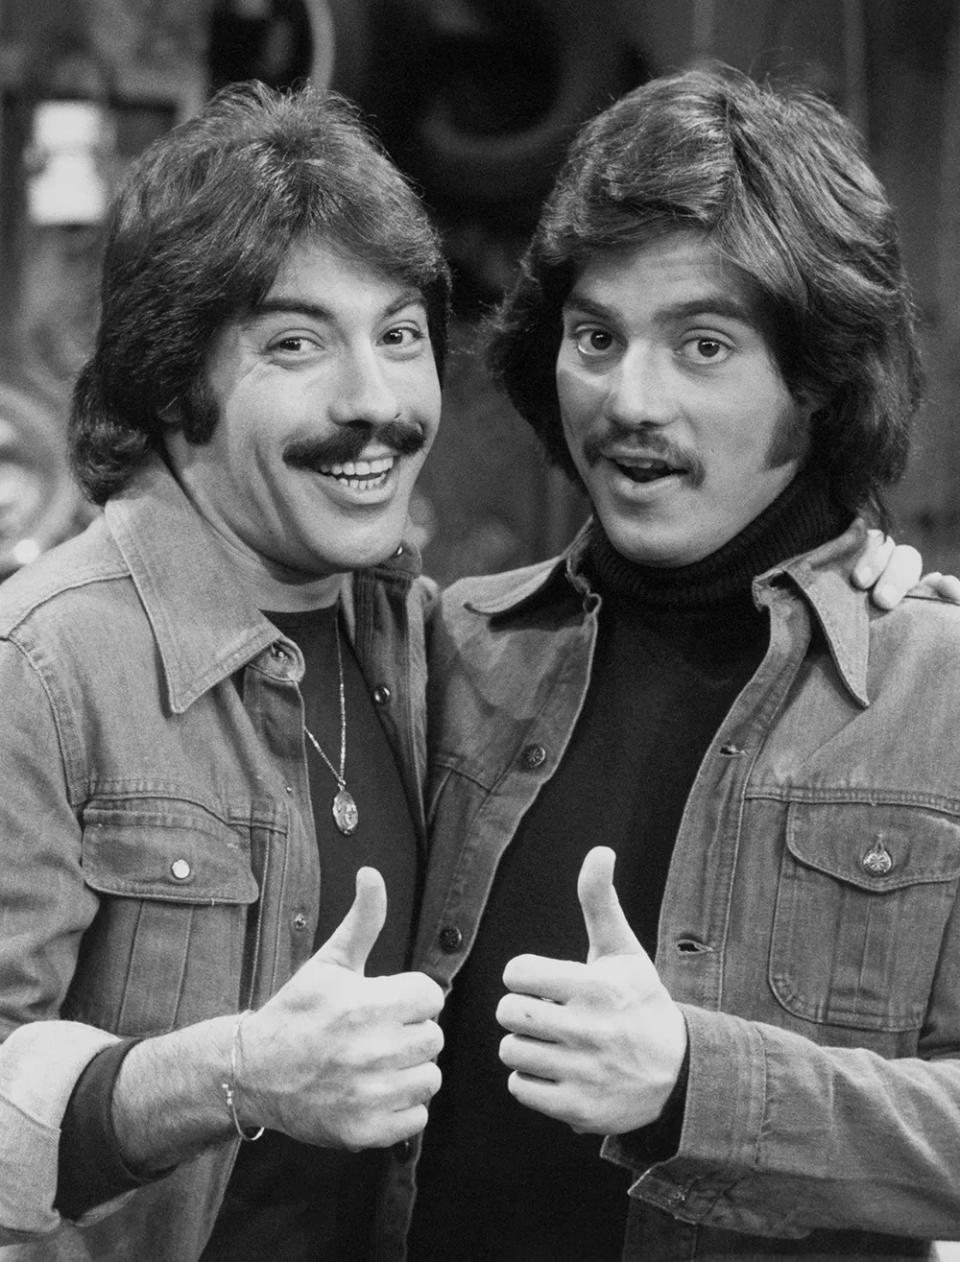 Tony Orlando and Freddie Prinze with their thumbs up.